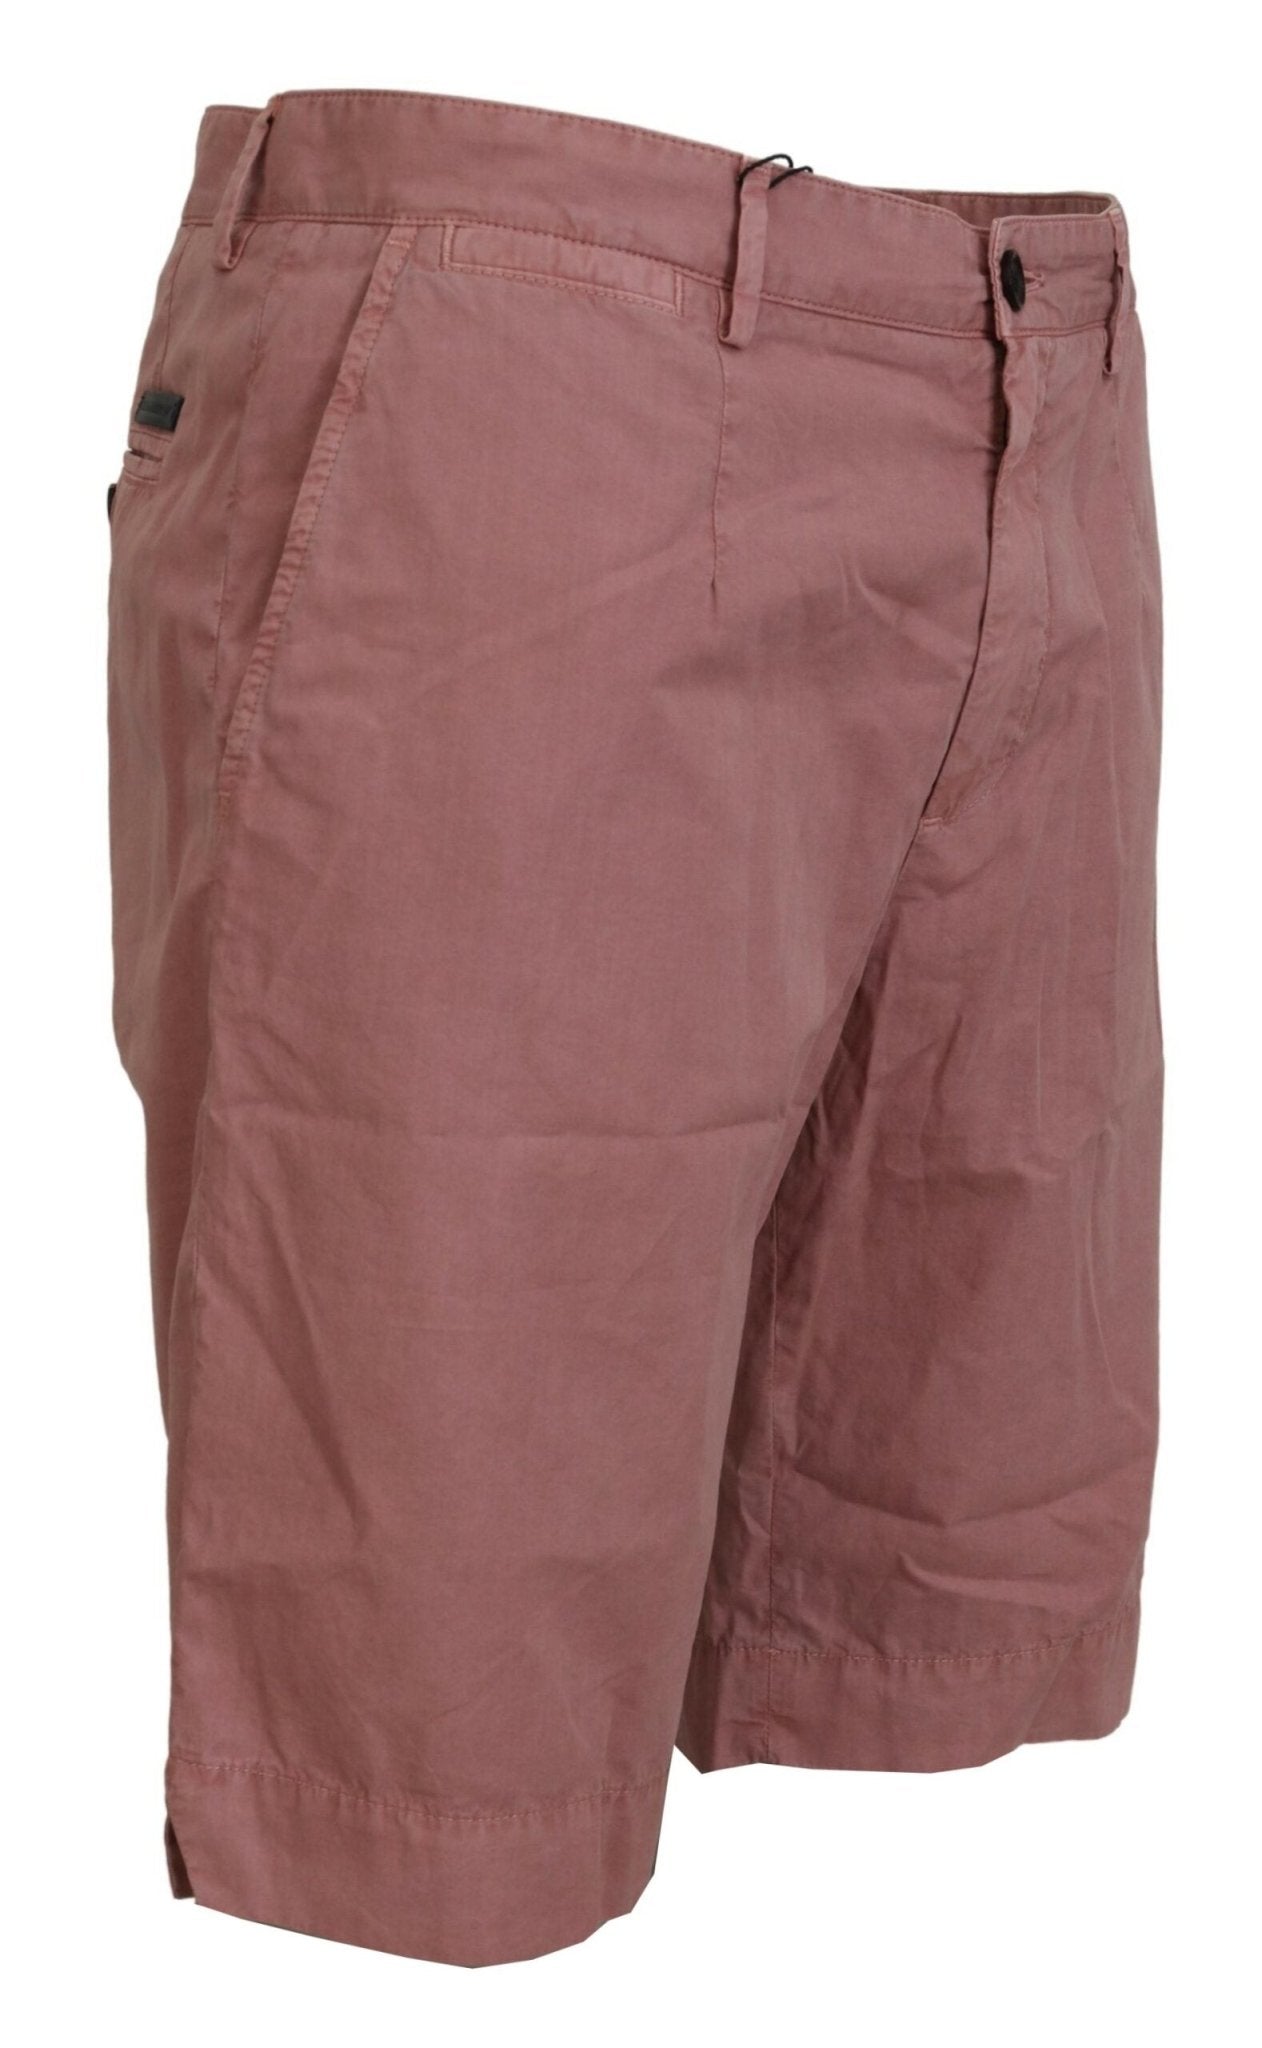 Dolce & Gabbana Exquisite Pink Chino Shorts for Men